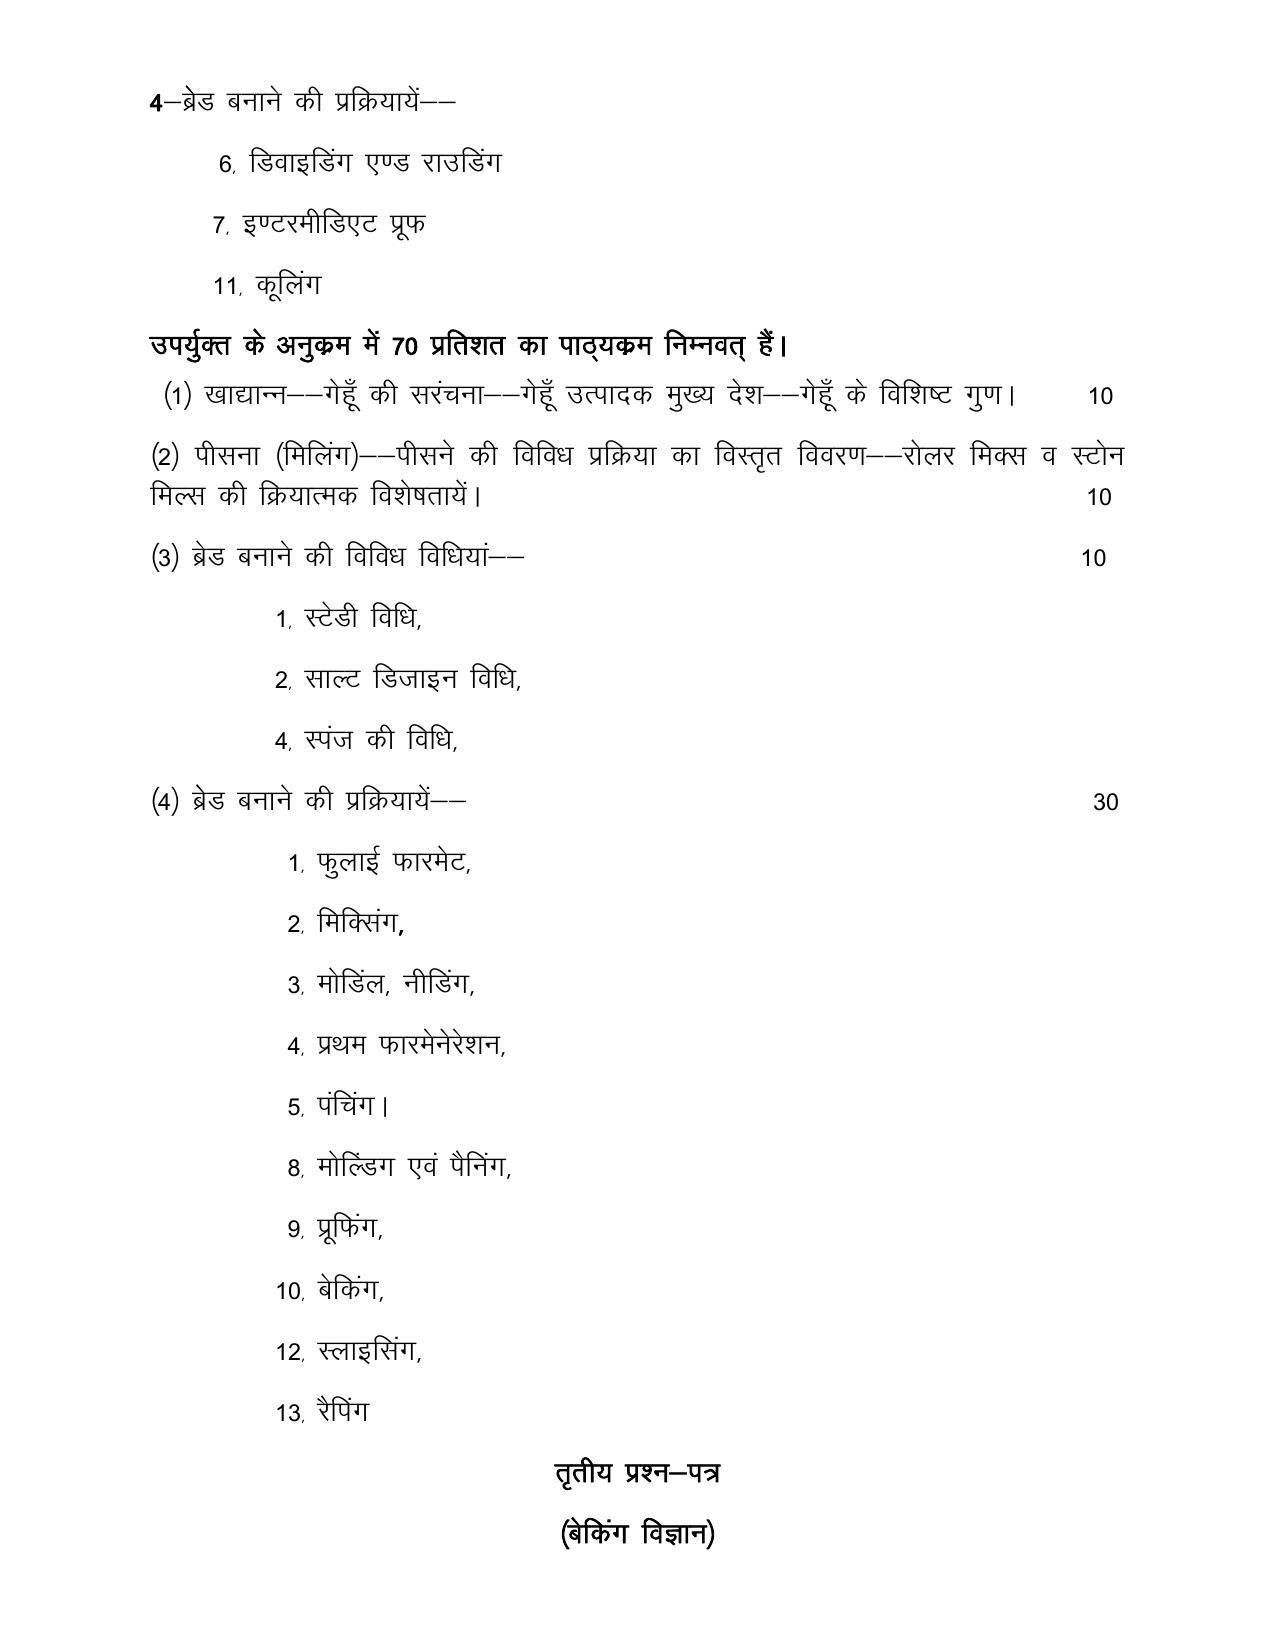 UP Board Class 12- Trade Subjects Syllabus Trade – 5 Baking & Confectionary - Page 3